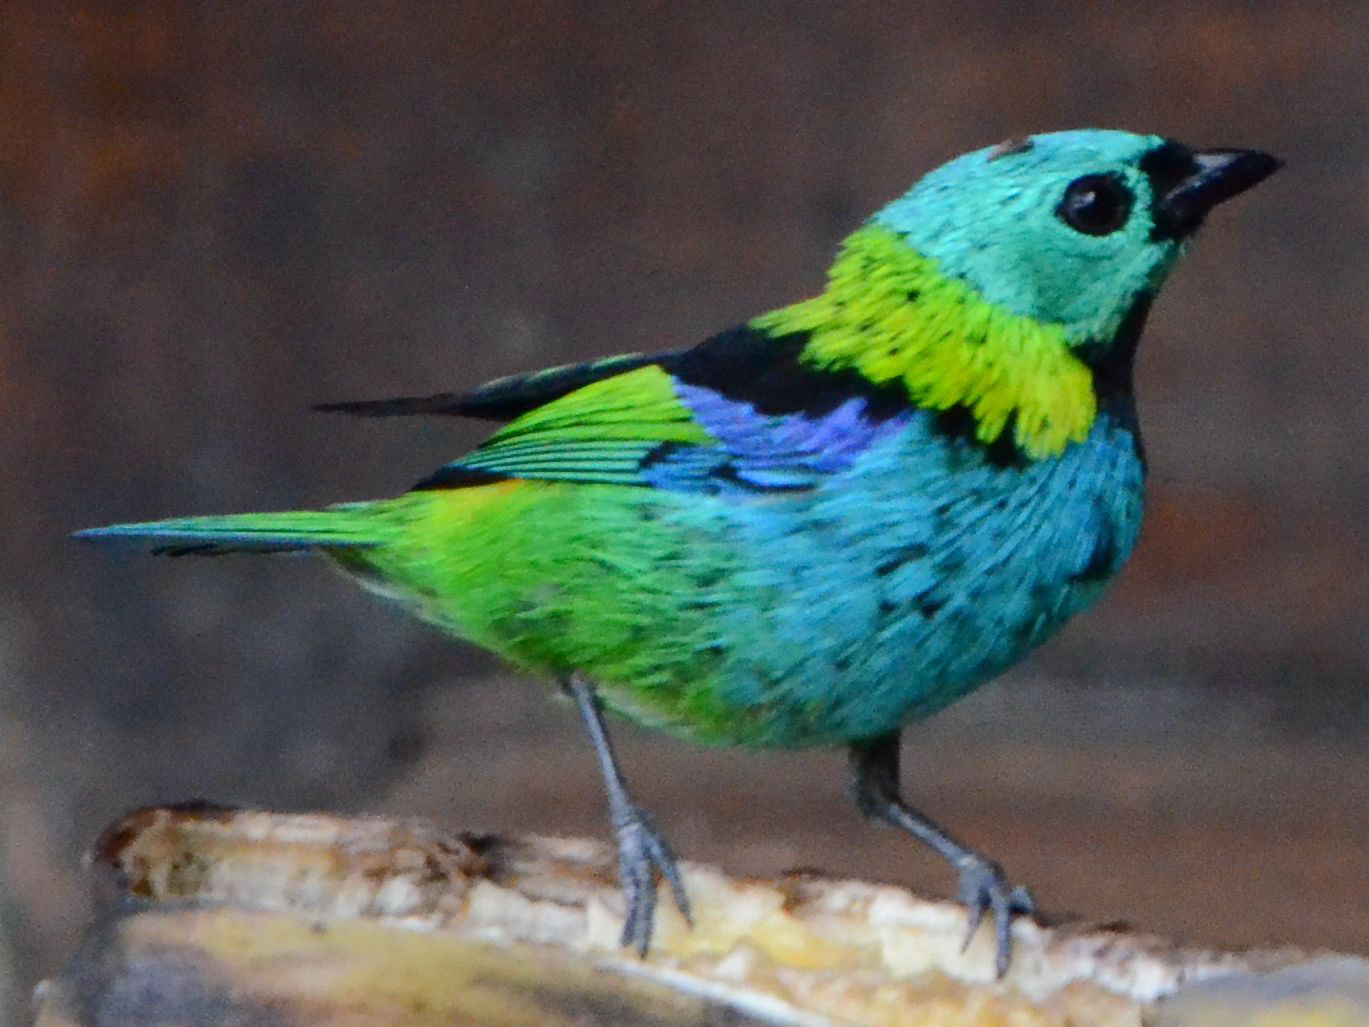 Click picture to see more Green-headed Tanagers.